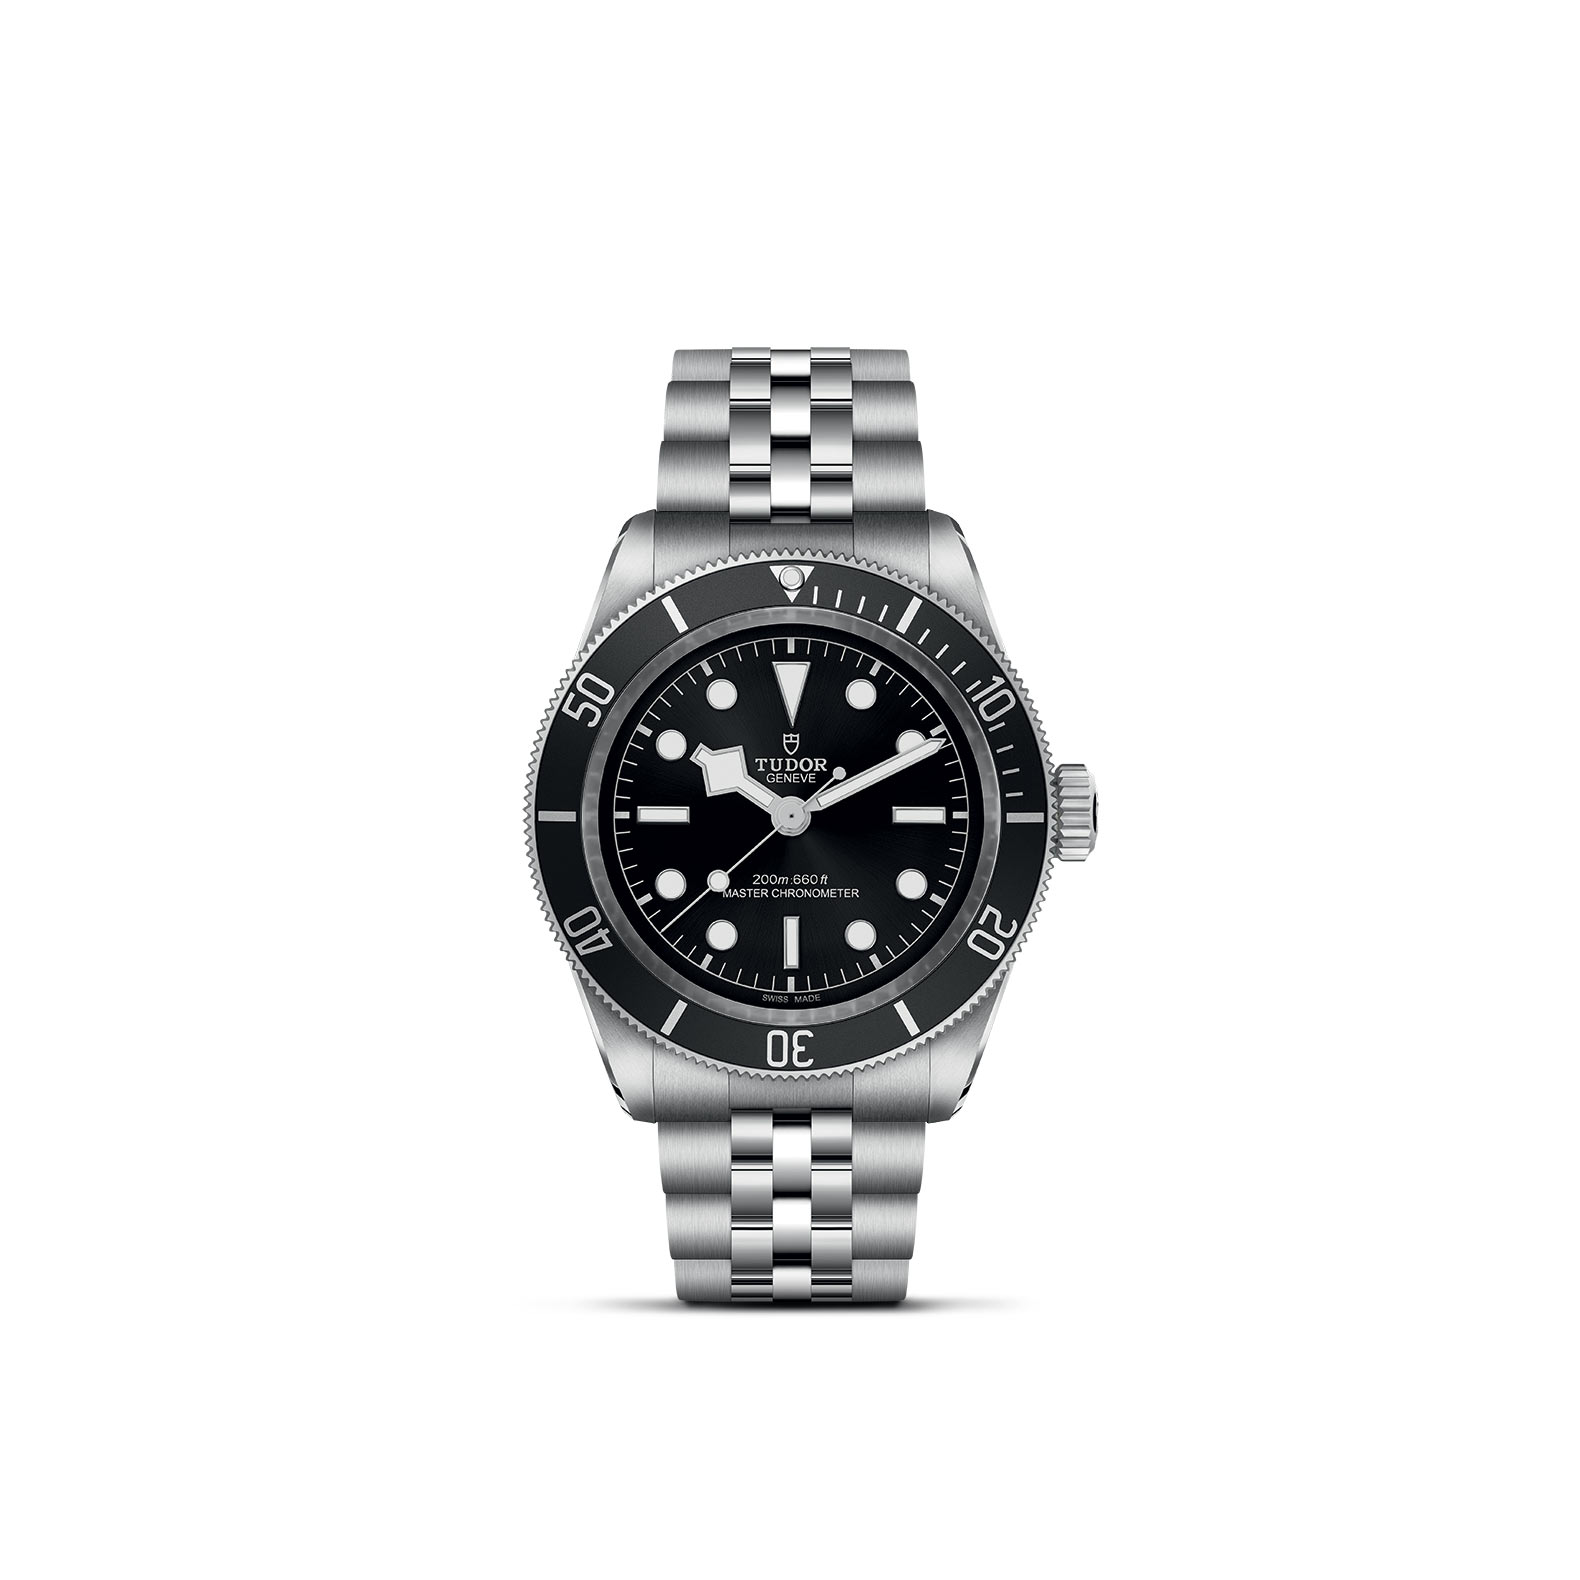 TUDOR BLACK BAY standing upright, highlighting its classic design against a white background.